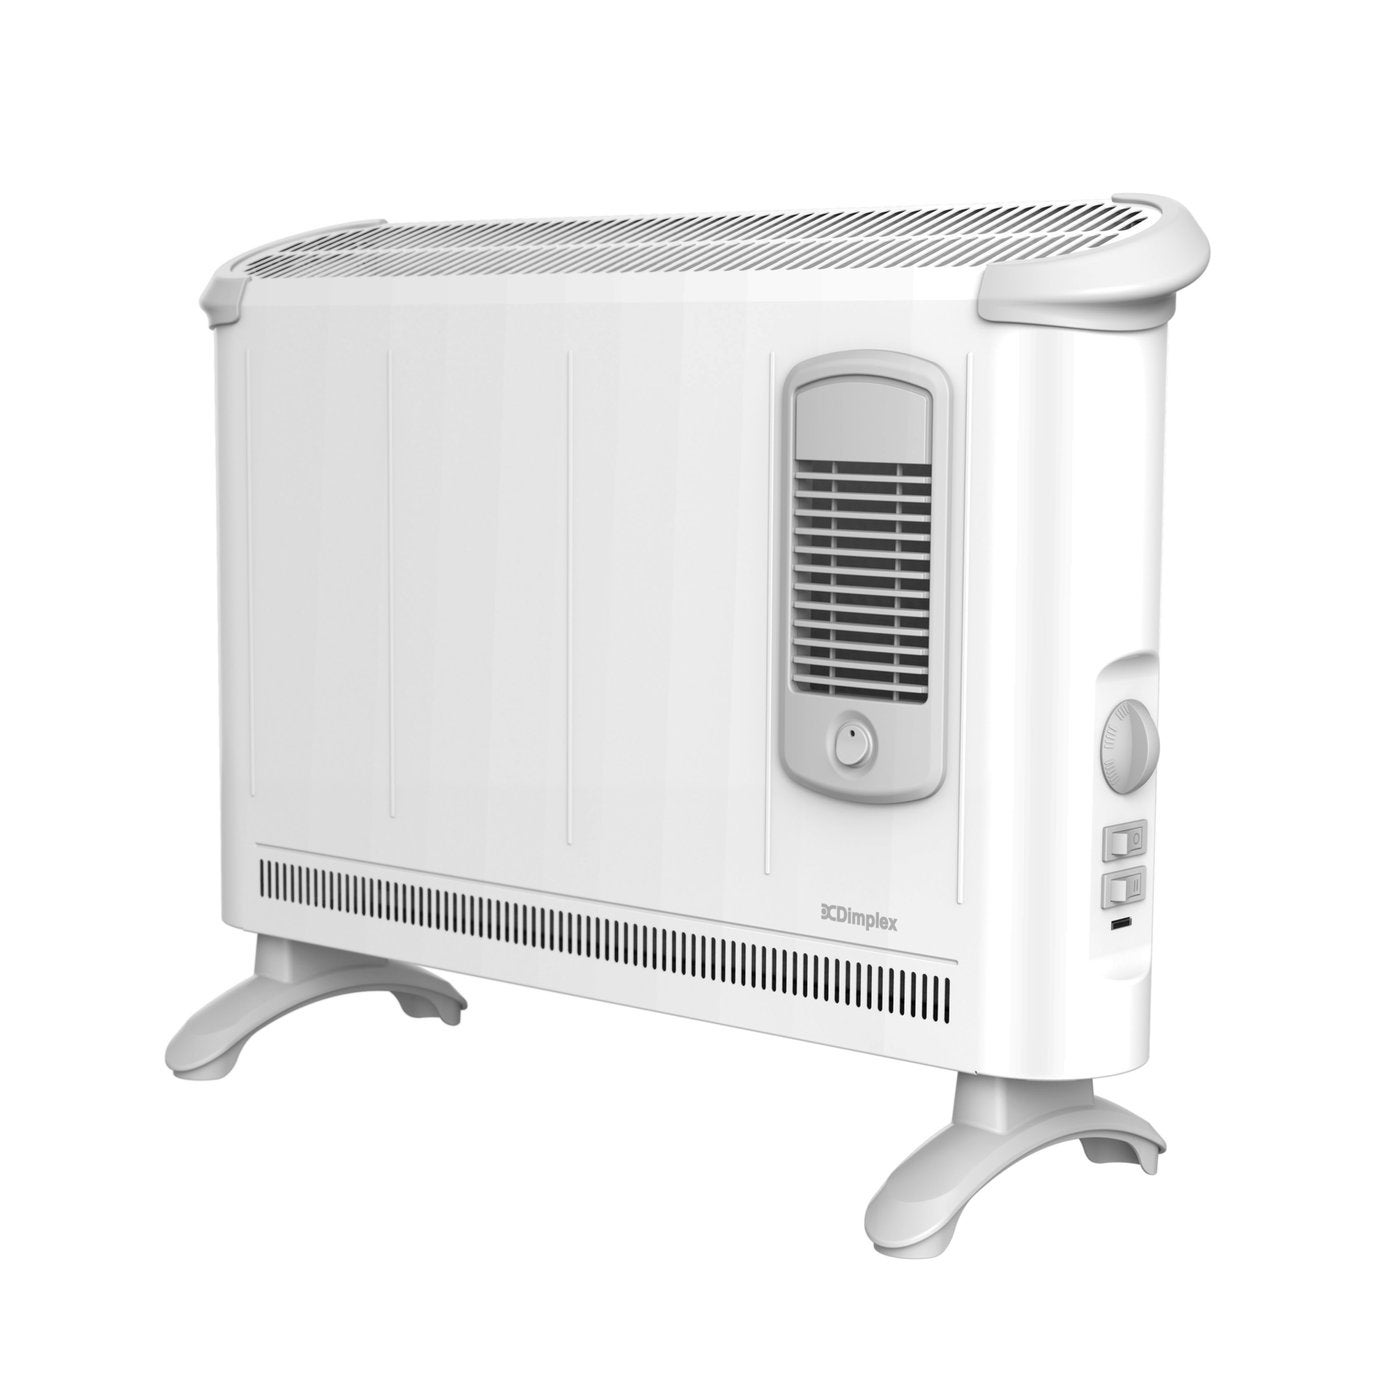 Dimplex Convector Heat with Turbo Fan review